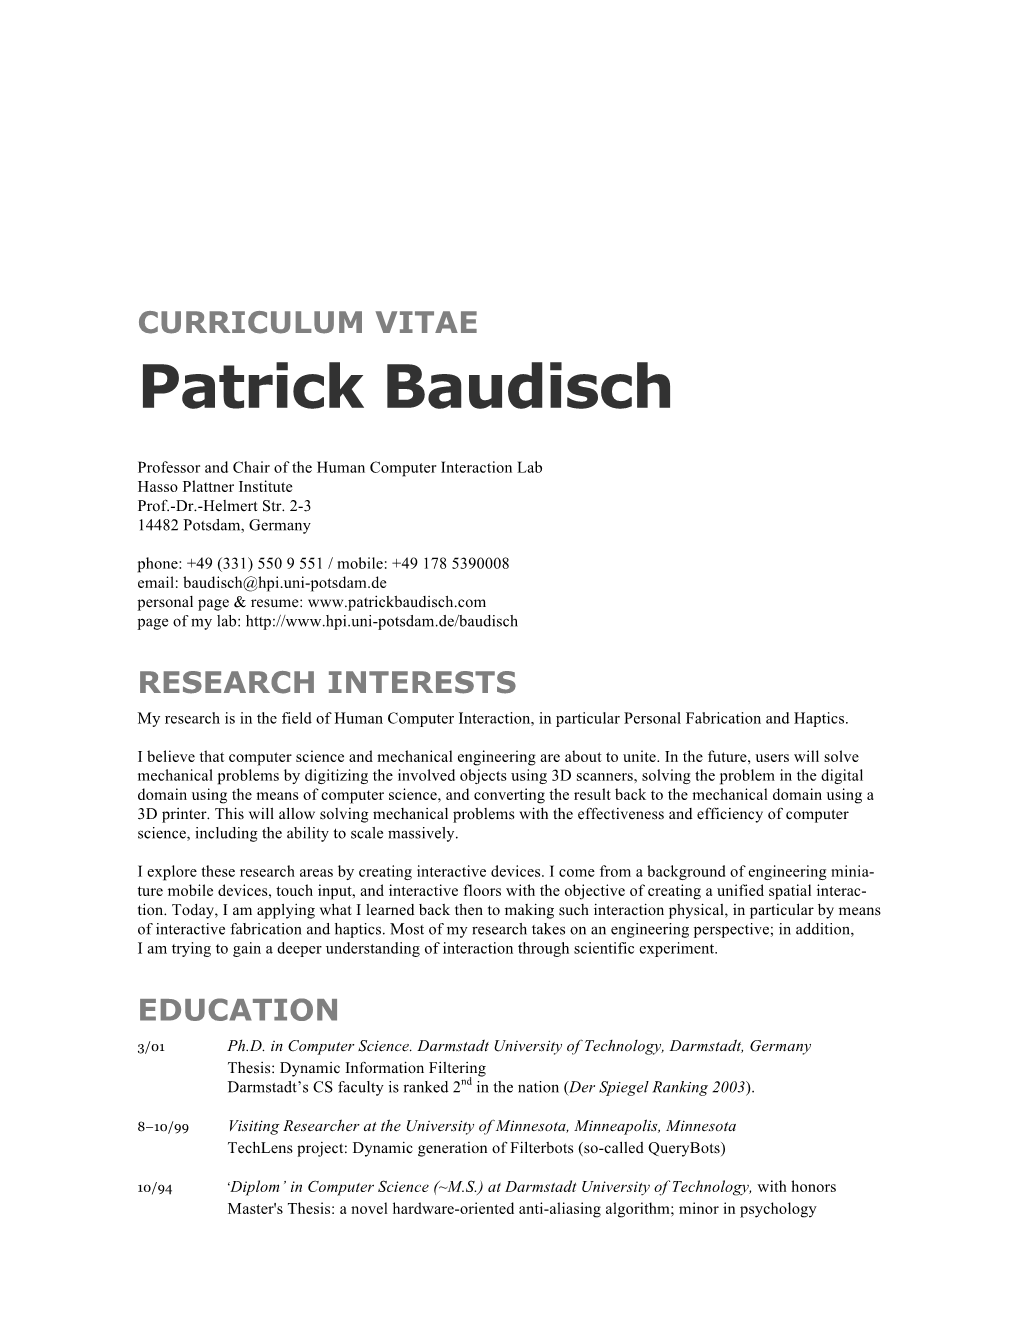 Resume: Page of My Lab